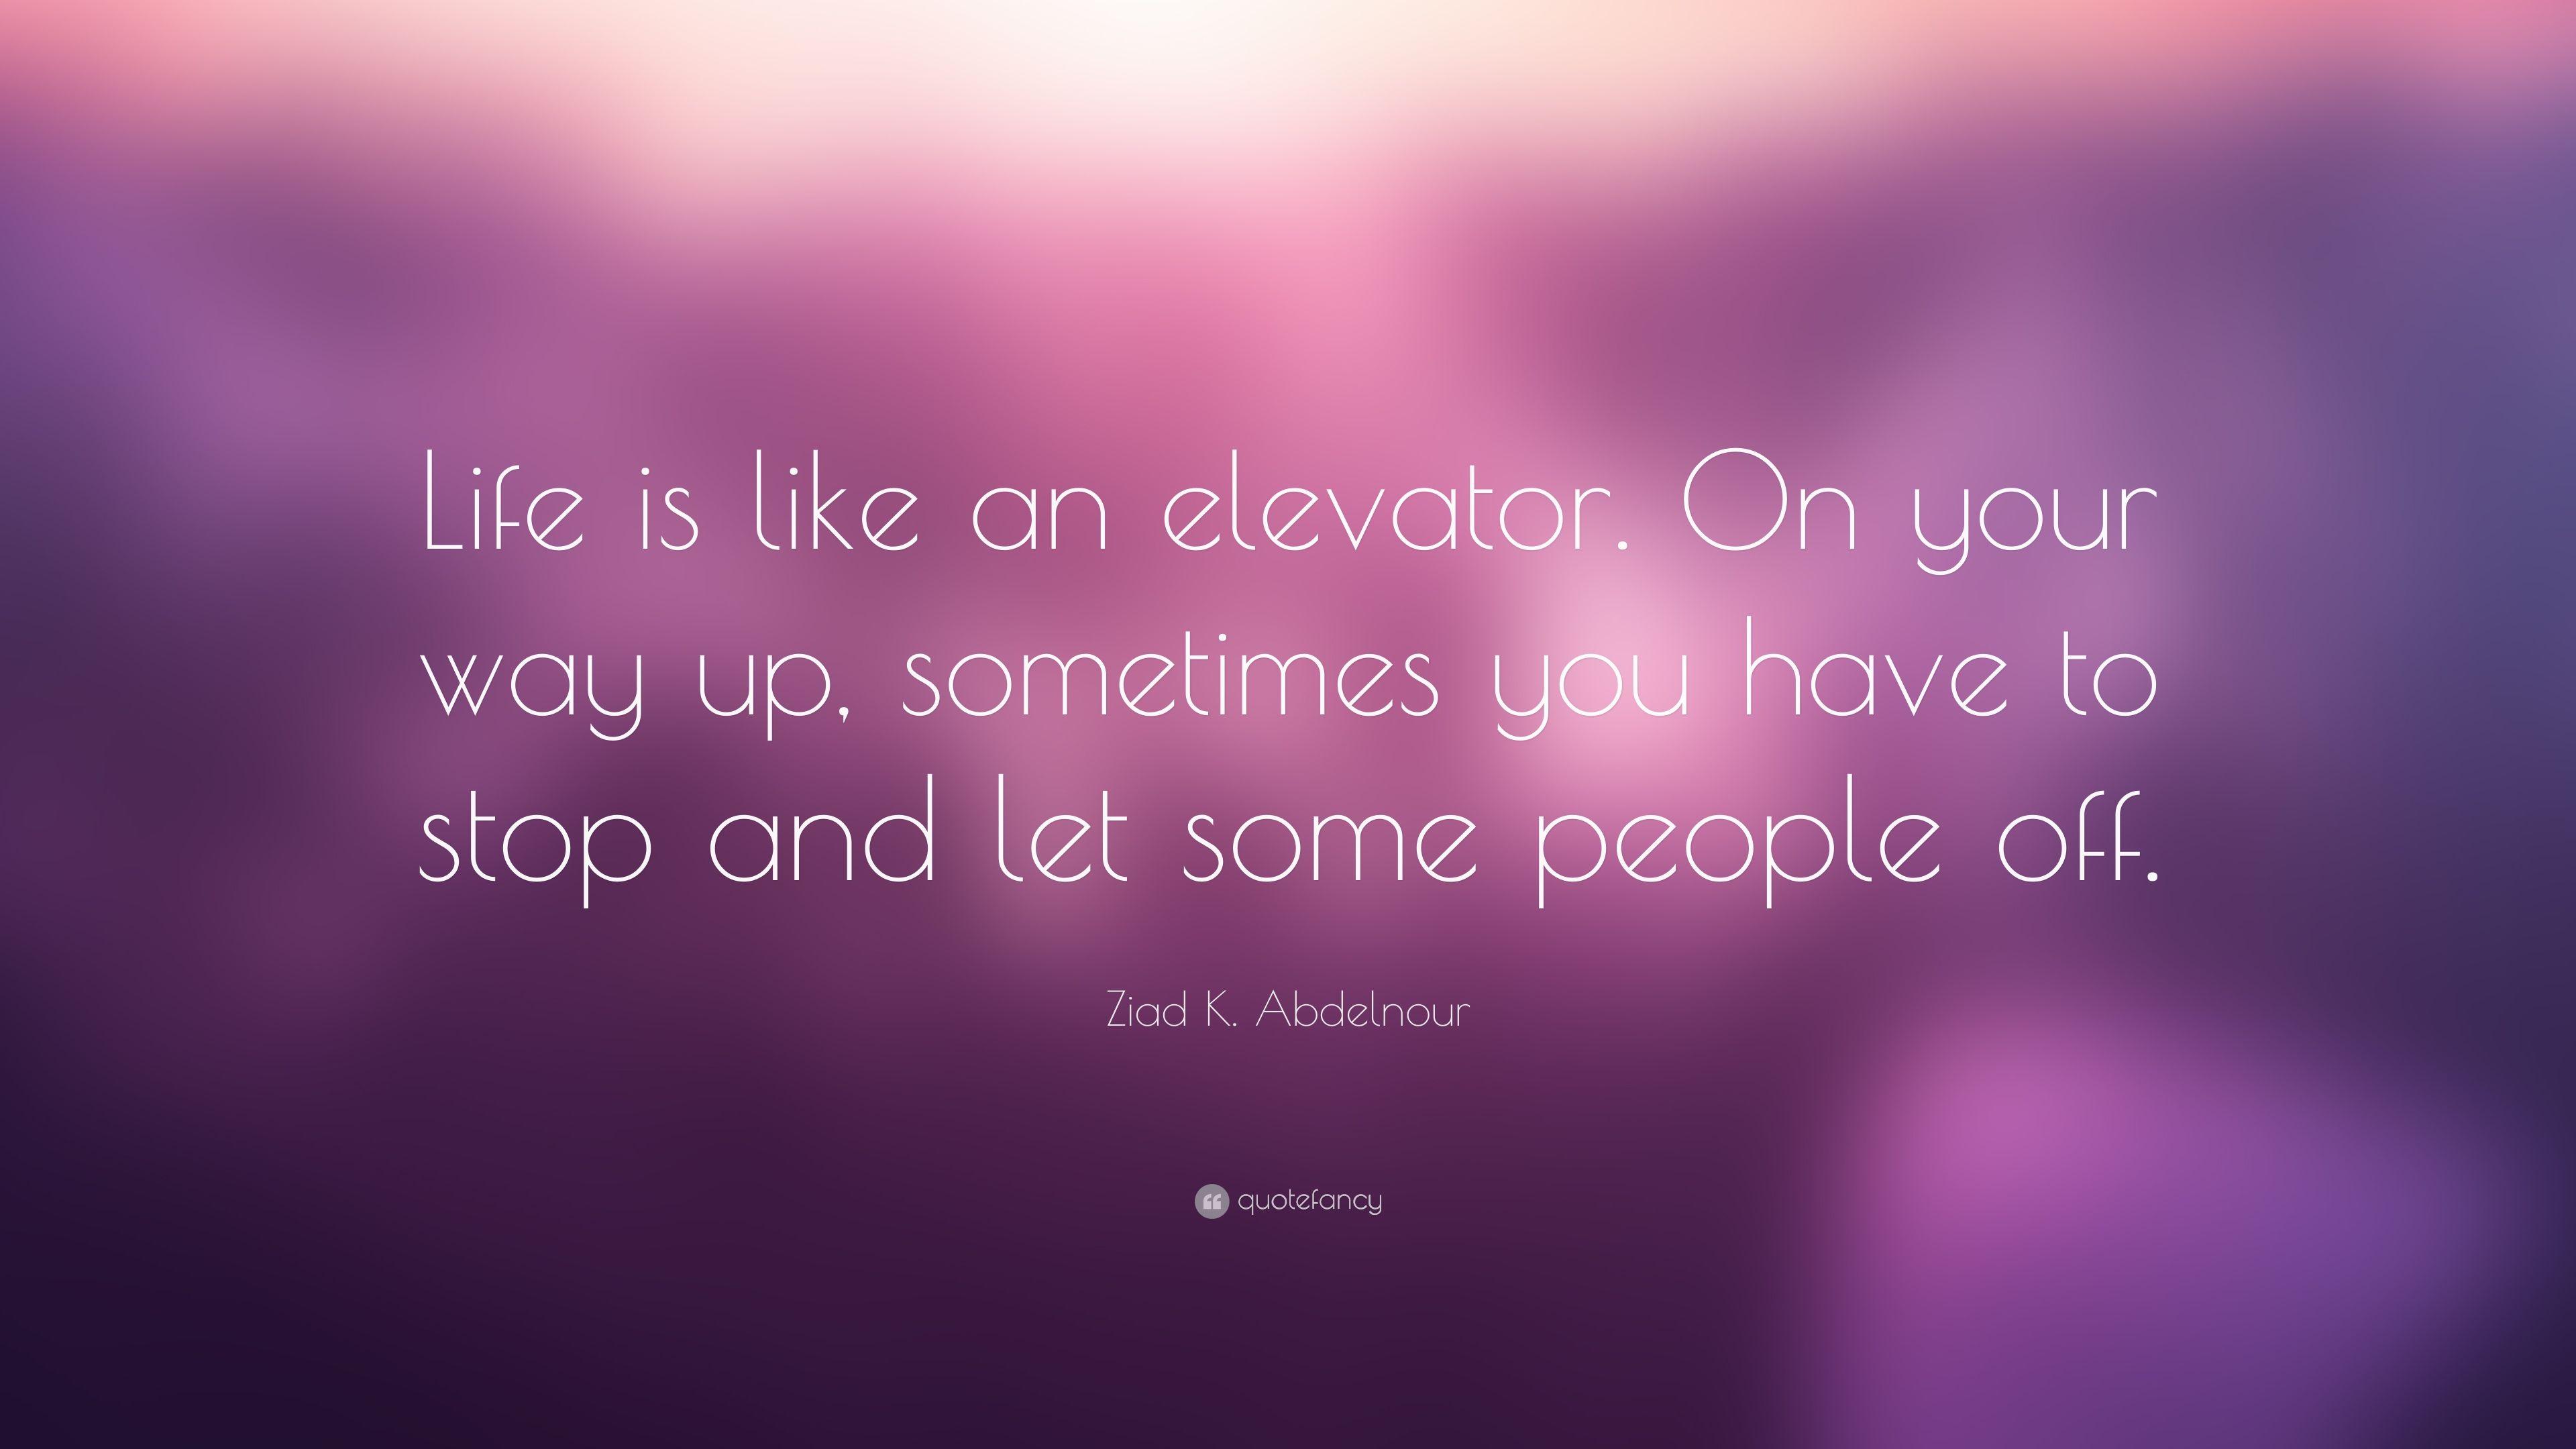 Ziad K. Abdelnour Quote: “Life is like an elevator. On your way up